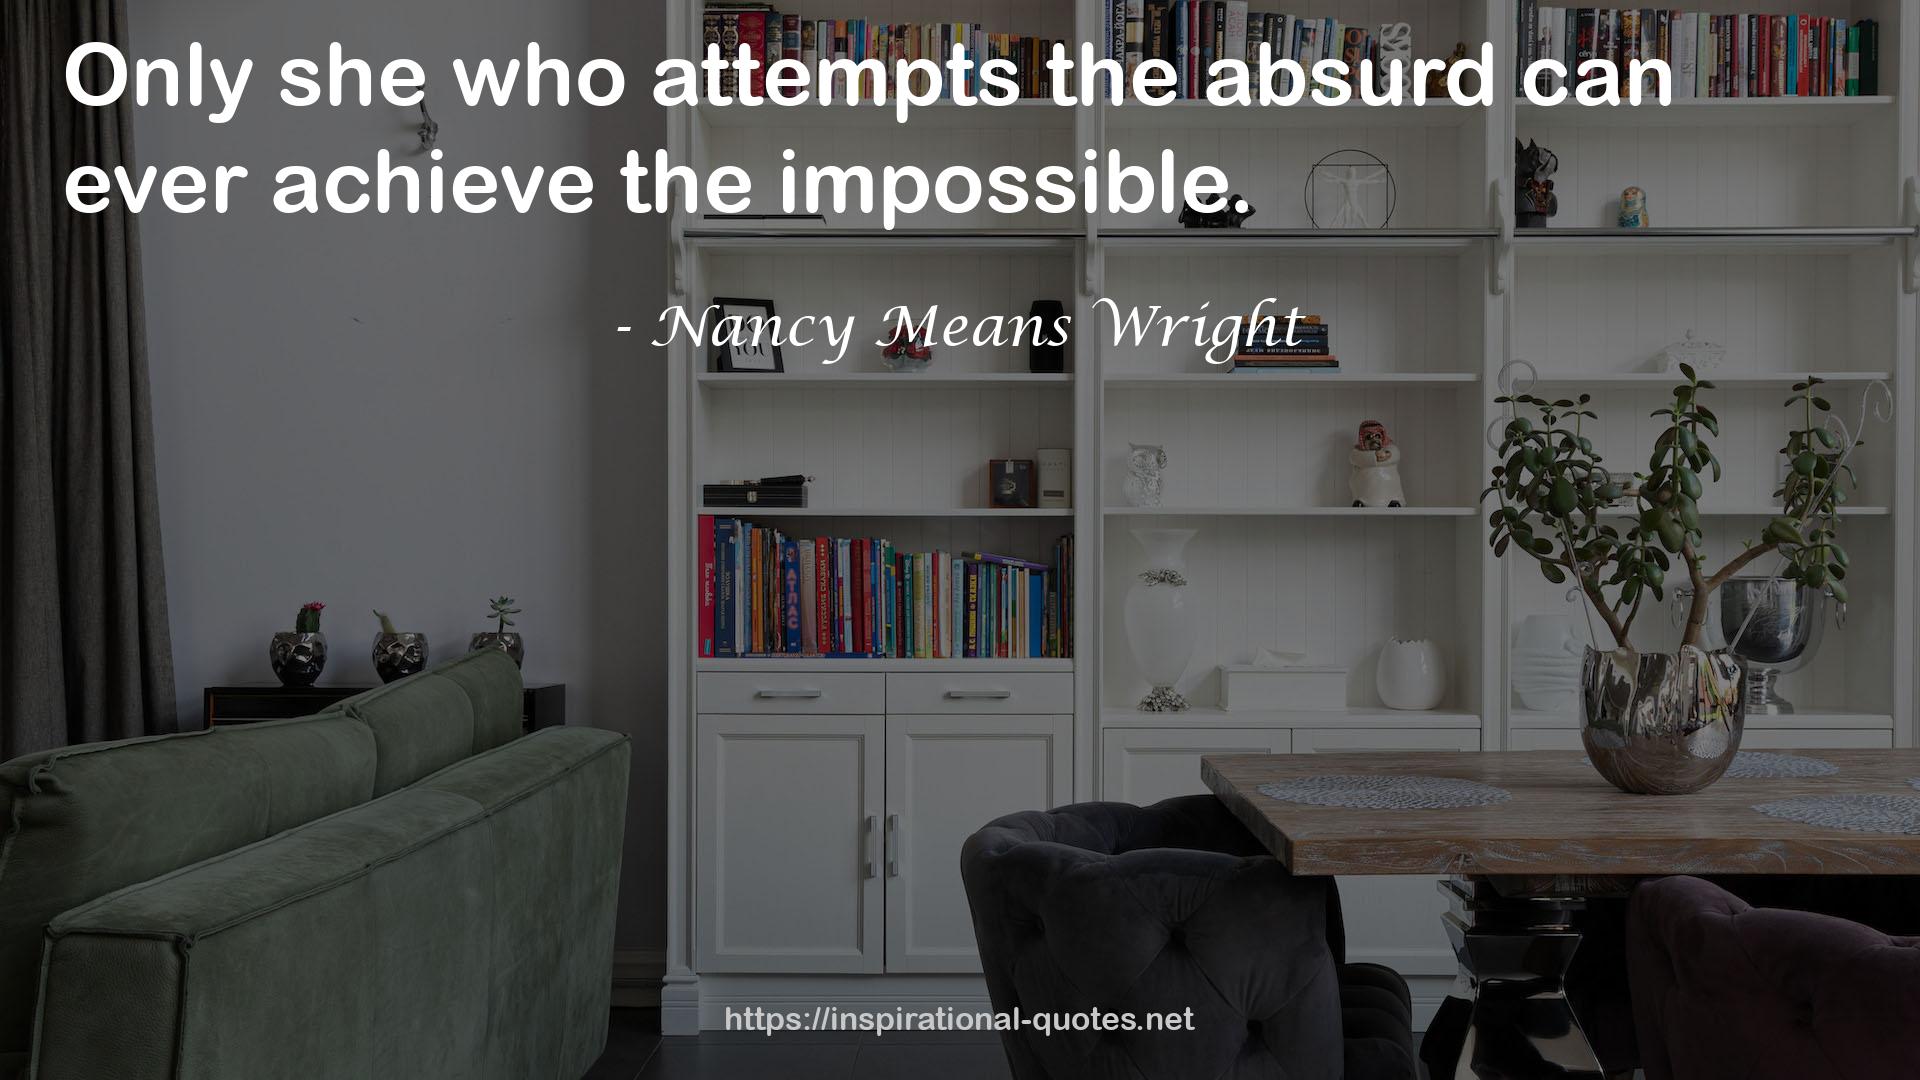 Nancy Means Wright QUOTES